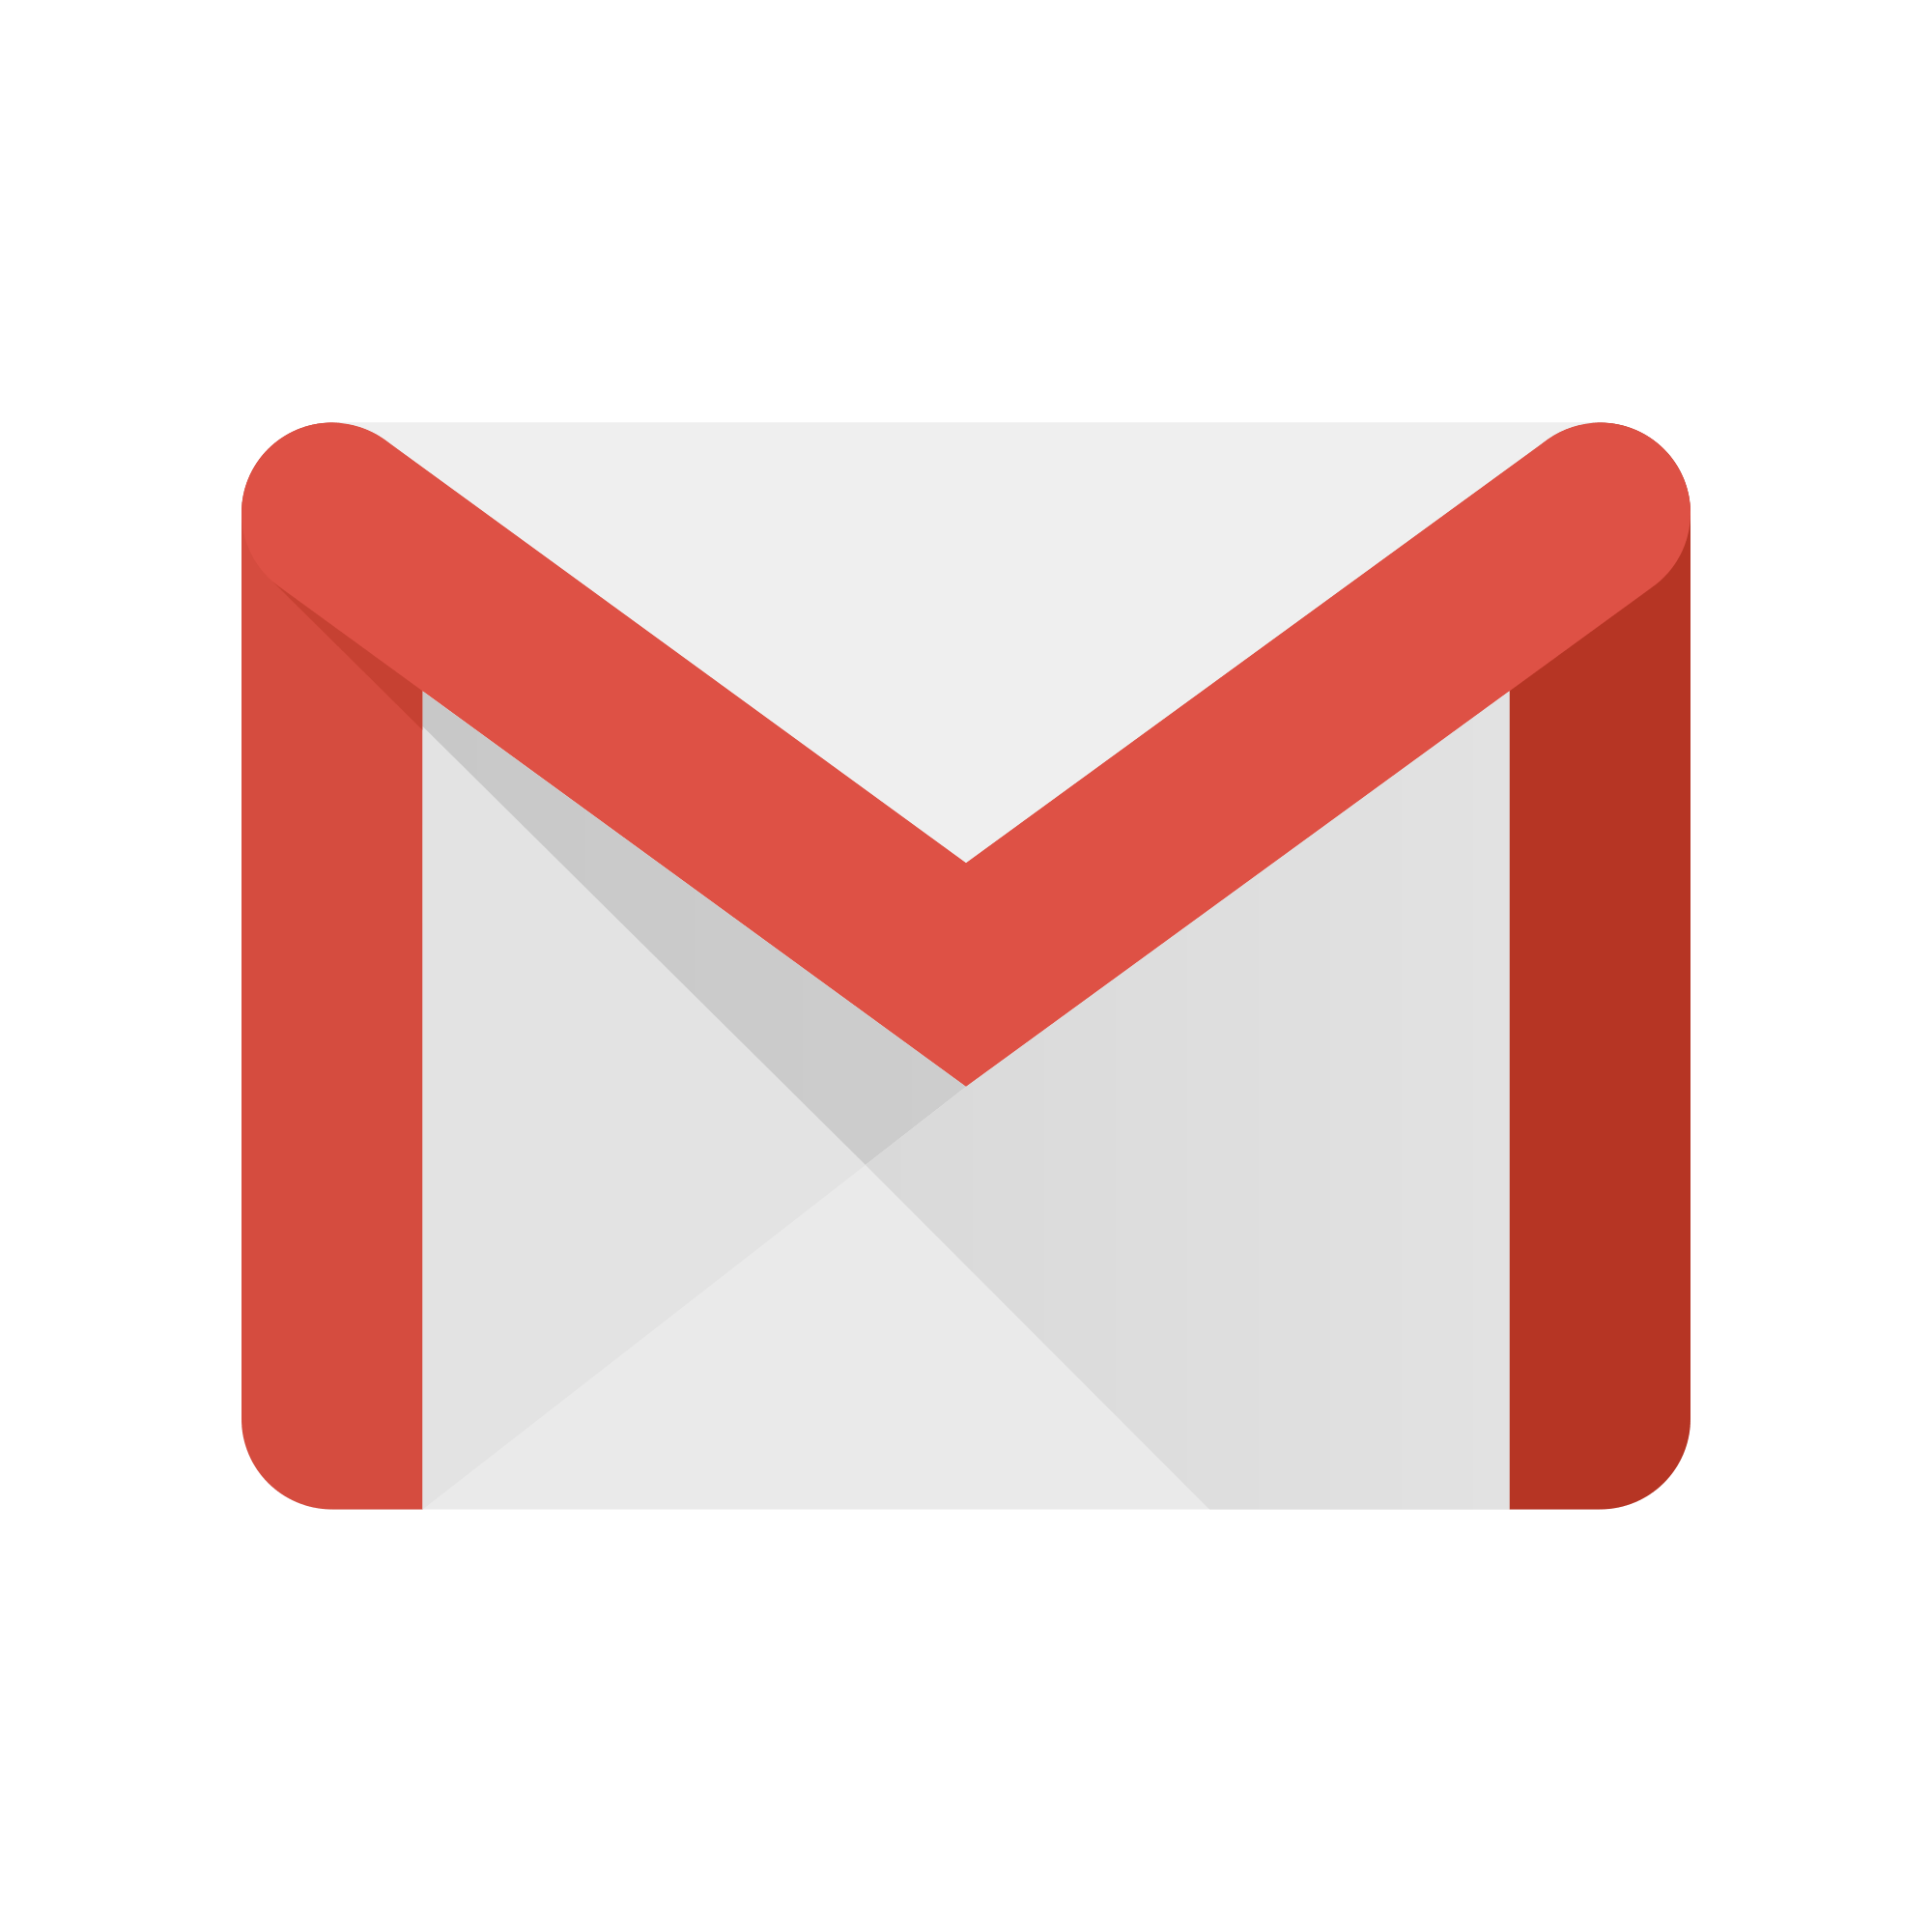 Small Gmail Logo - Free Gmail Icon Svg 111123 | Download Gmail Icon Svg - 111123